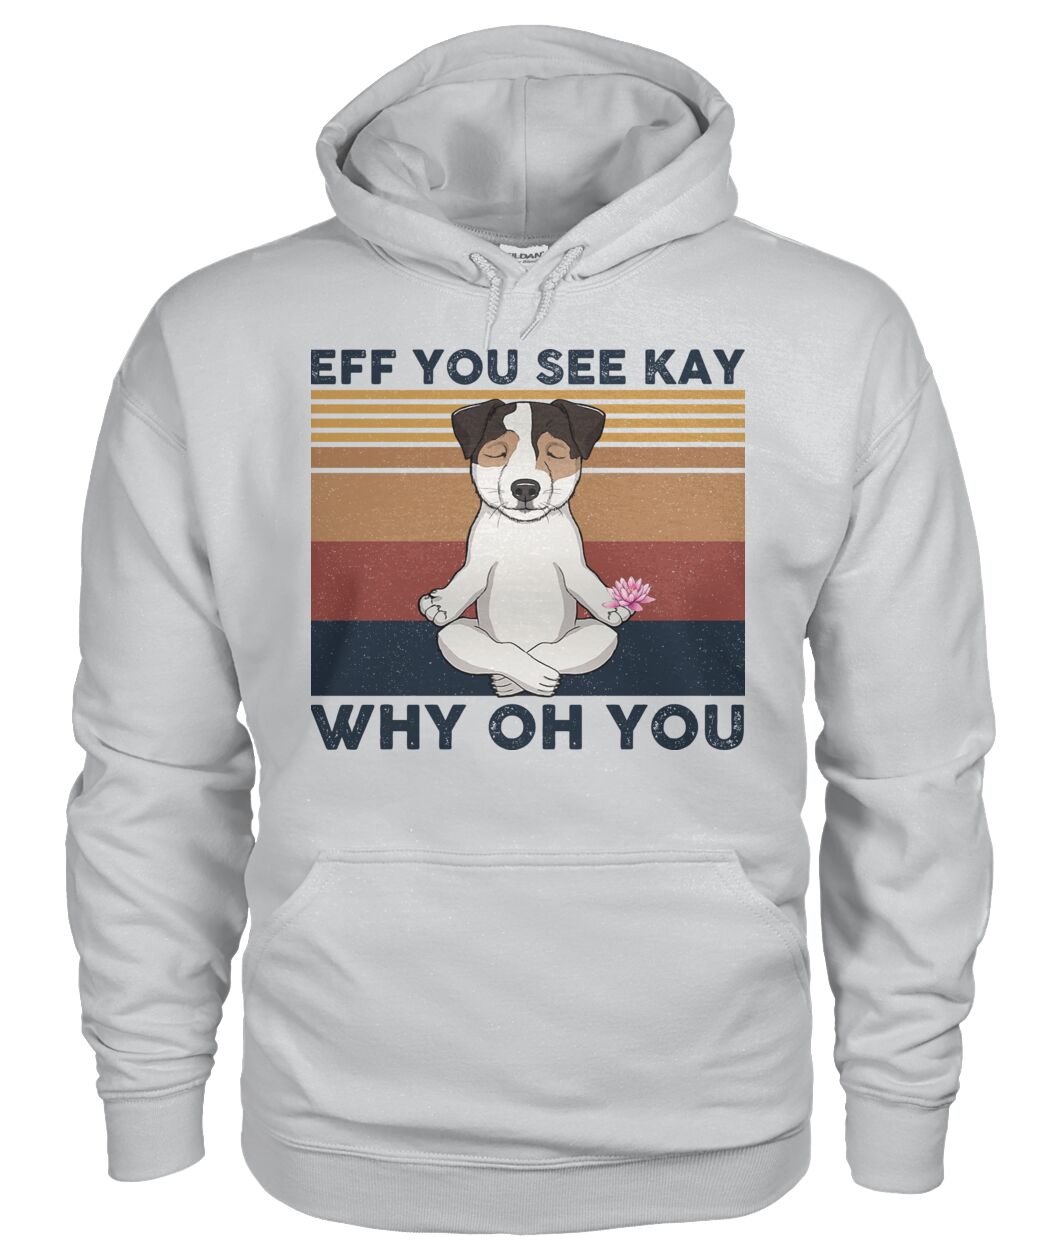 Jack Russell Yoga Eff You See Kay Why Oh You 3D Hoodie, Shirt 9